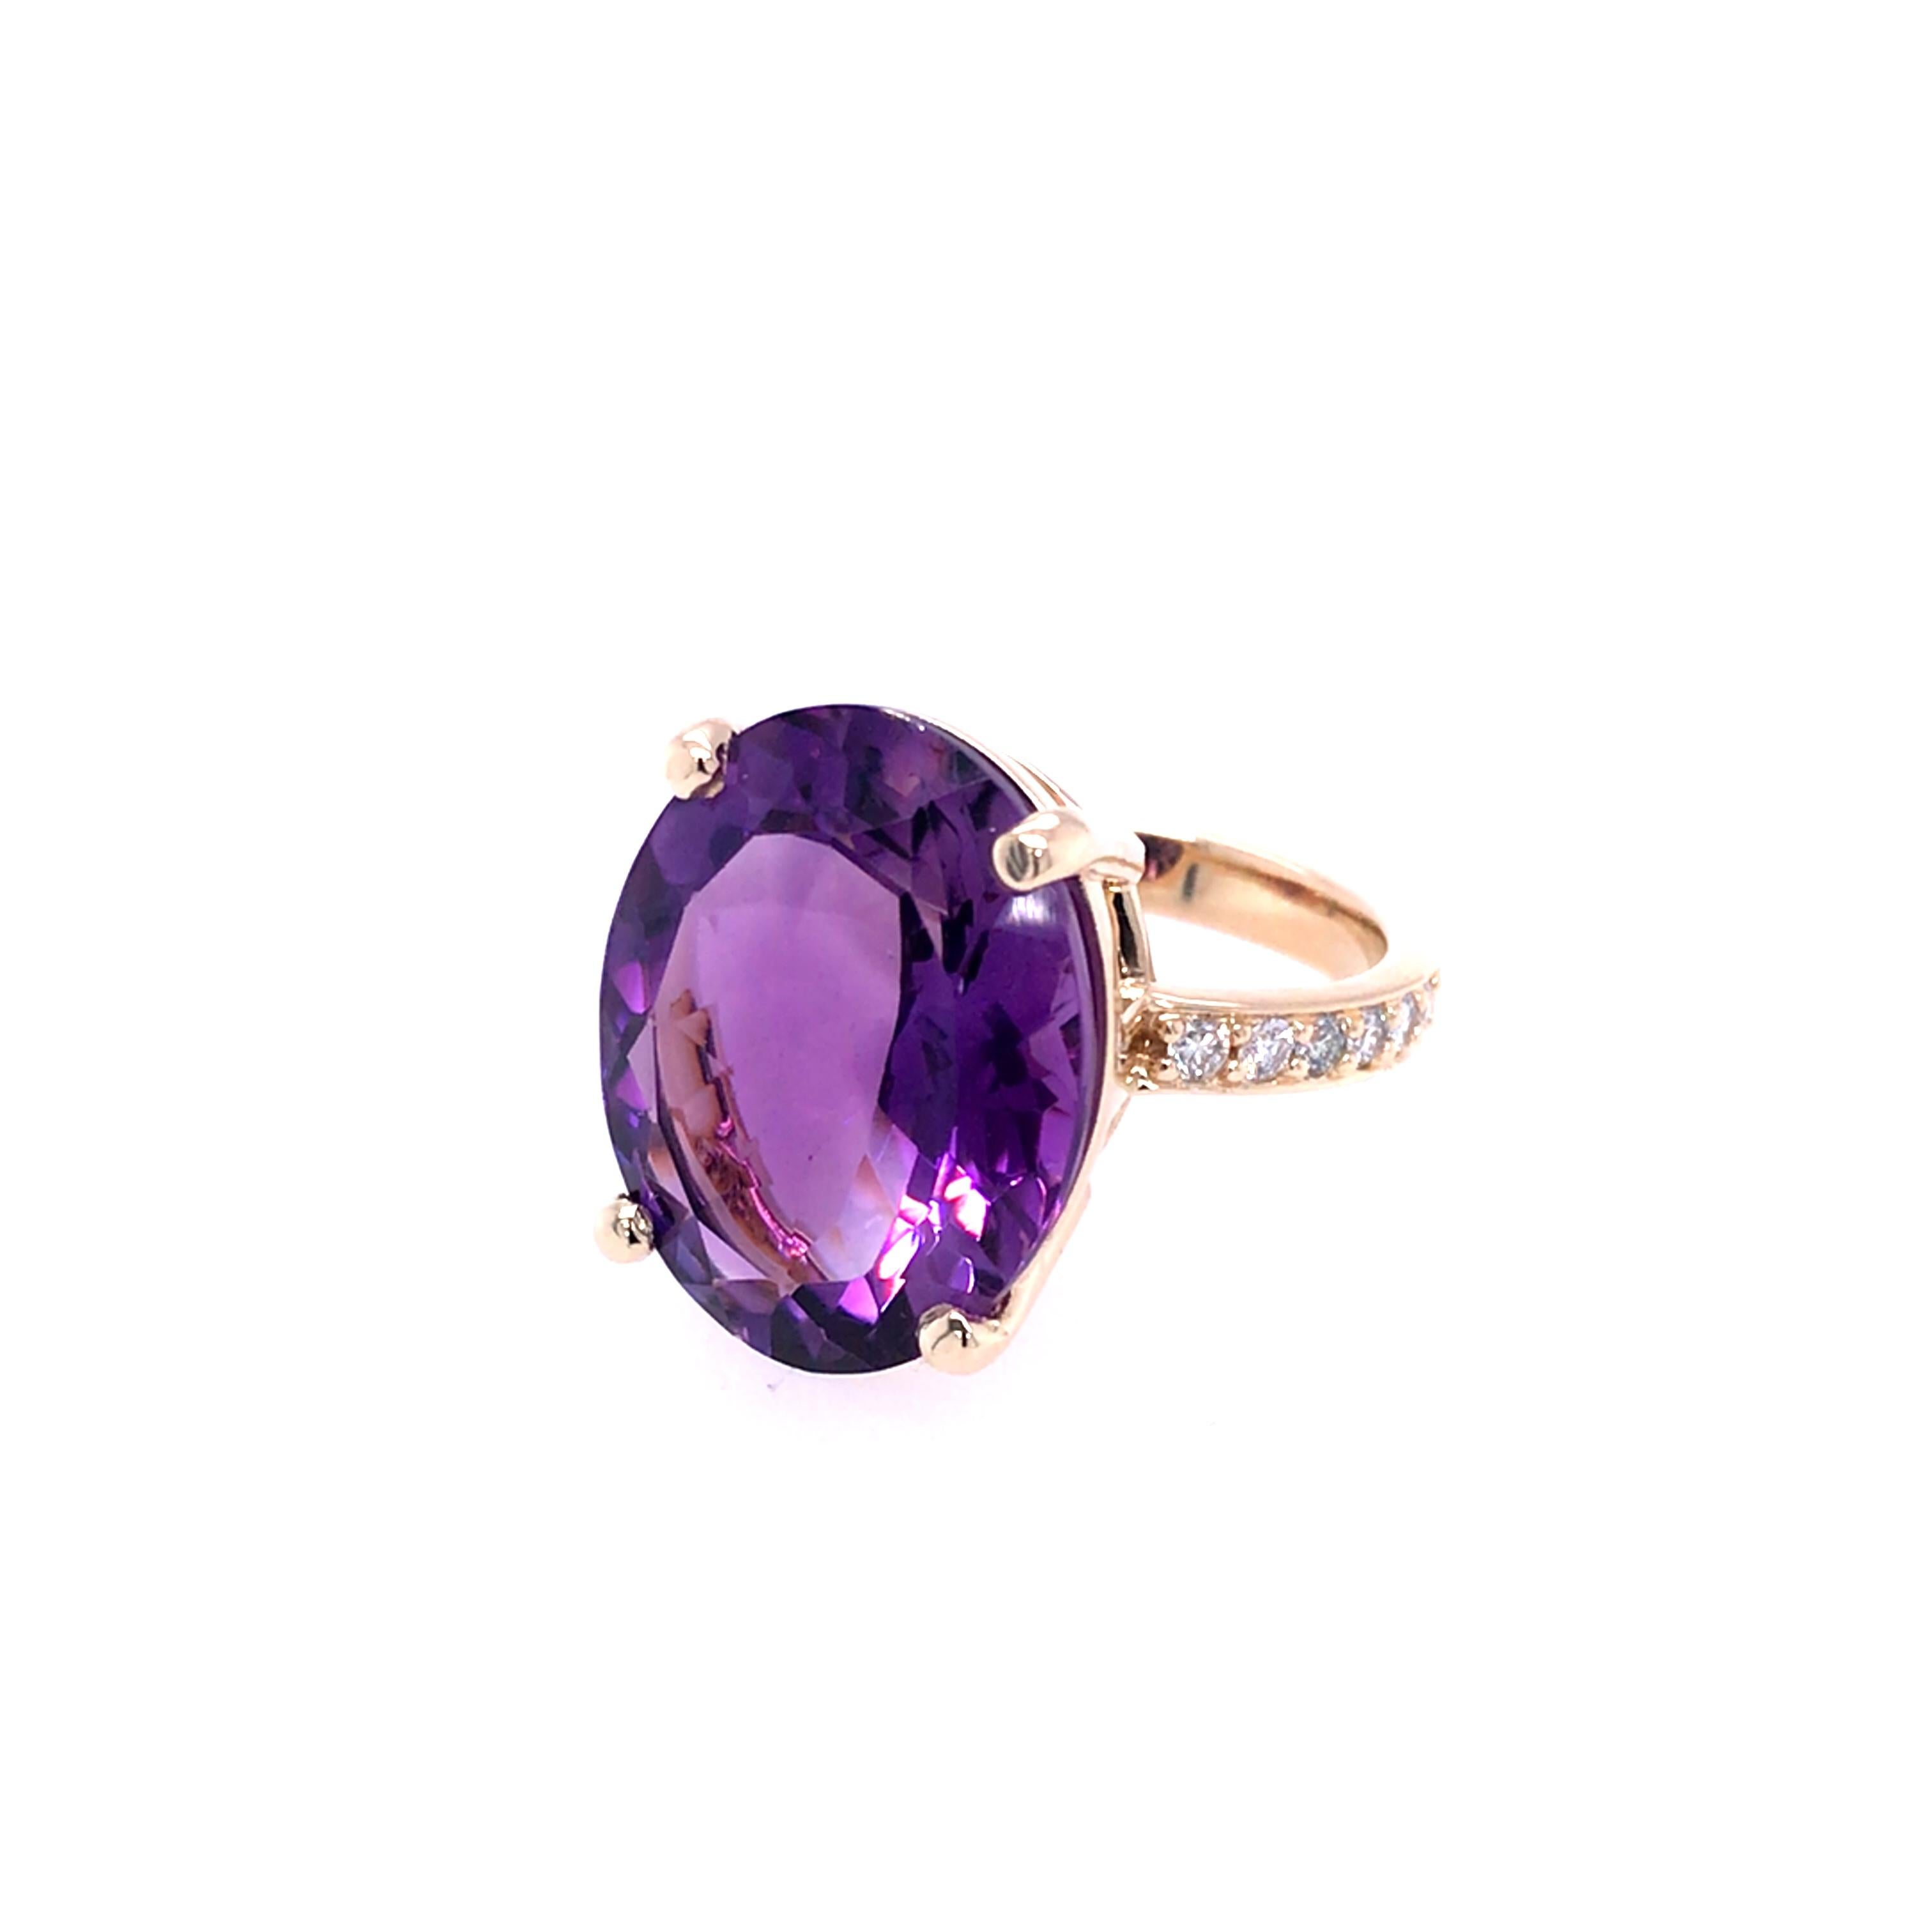 Oval amethyst and round brilliant diamond cocktail ring set in 9ct yellow gold.
One mid purple faceted oval amethyst  measuring 18mm x 14mm x 8.17mm and weighing 10.83ct
12 round brilliant diamonds weighing 0.30ct in total, GSI
Setting - 4 claw 9ct